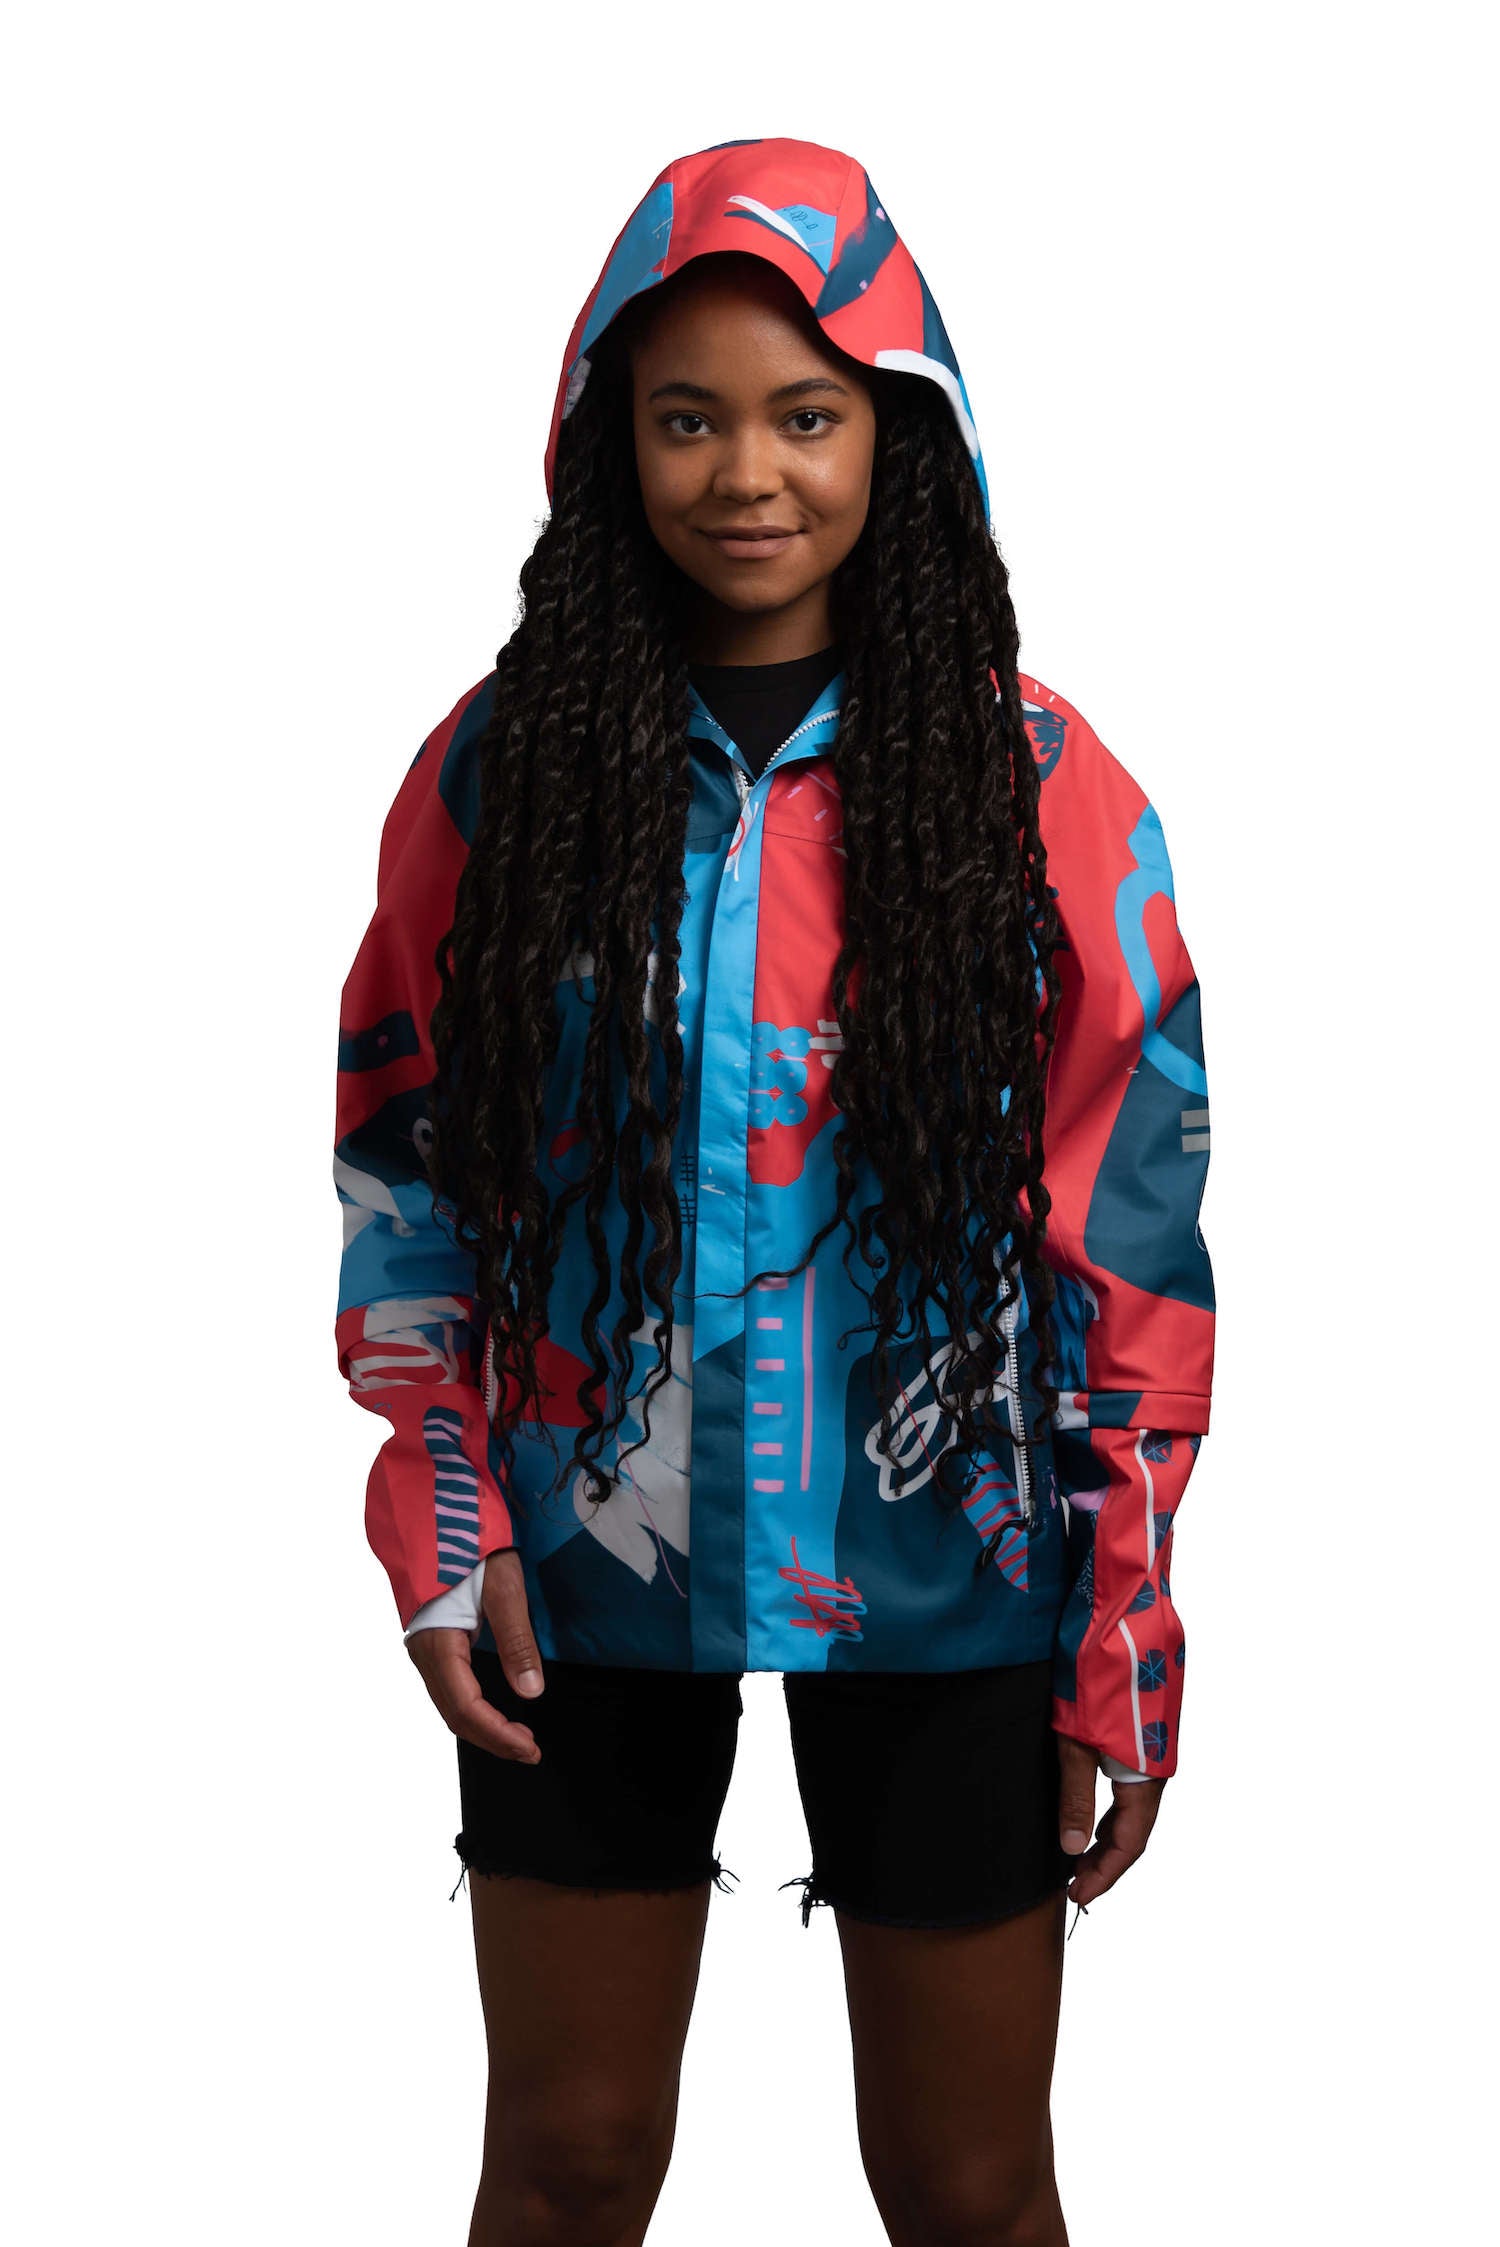 Red and Blue Jacket - Artist Edition MONTREET - Cycling Wear for Women and Men - Raincoat with Hood - Waterproof - Environmentally Friendly